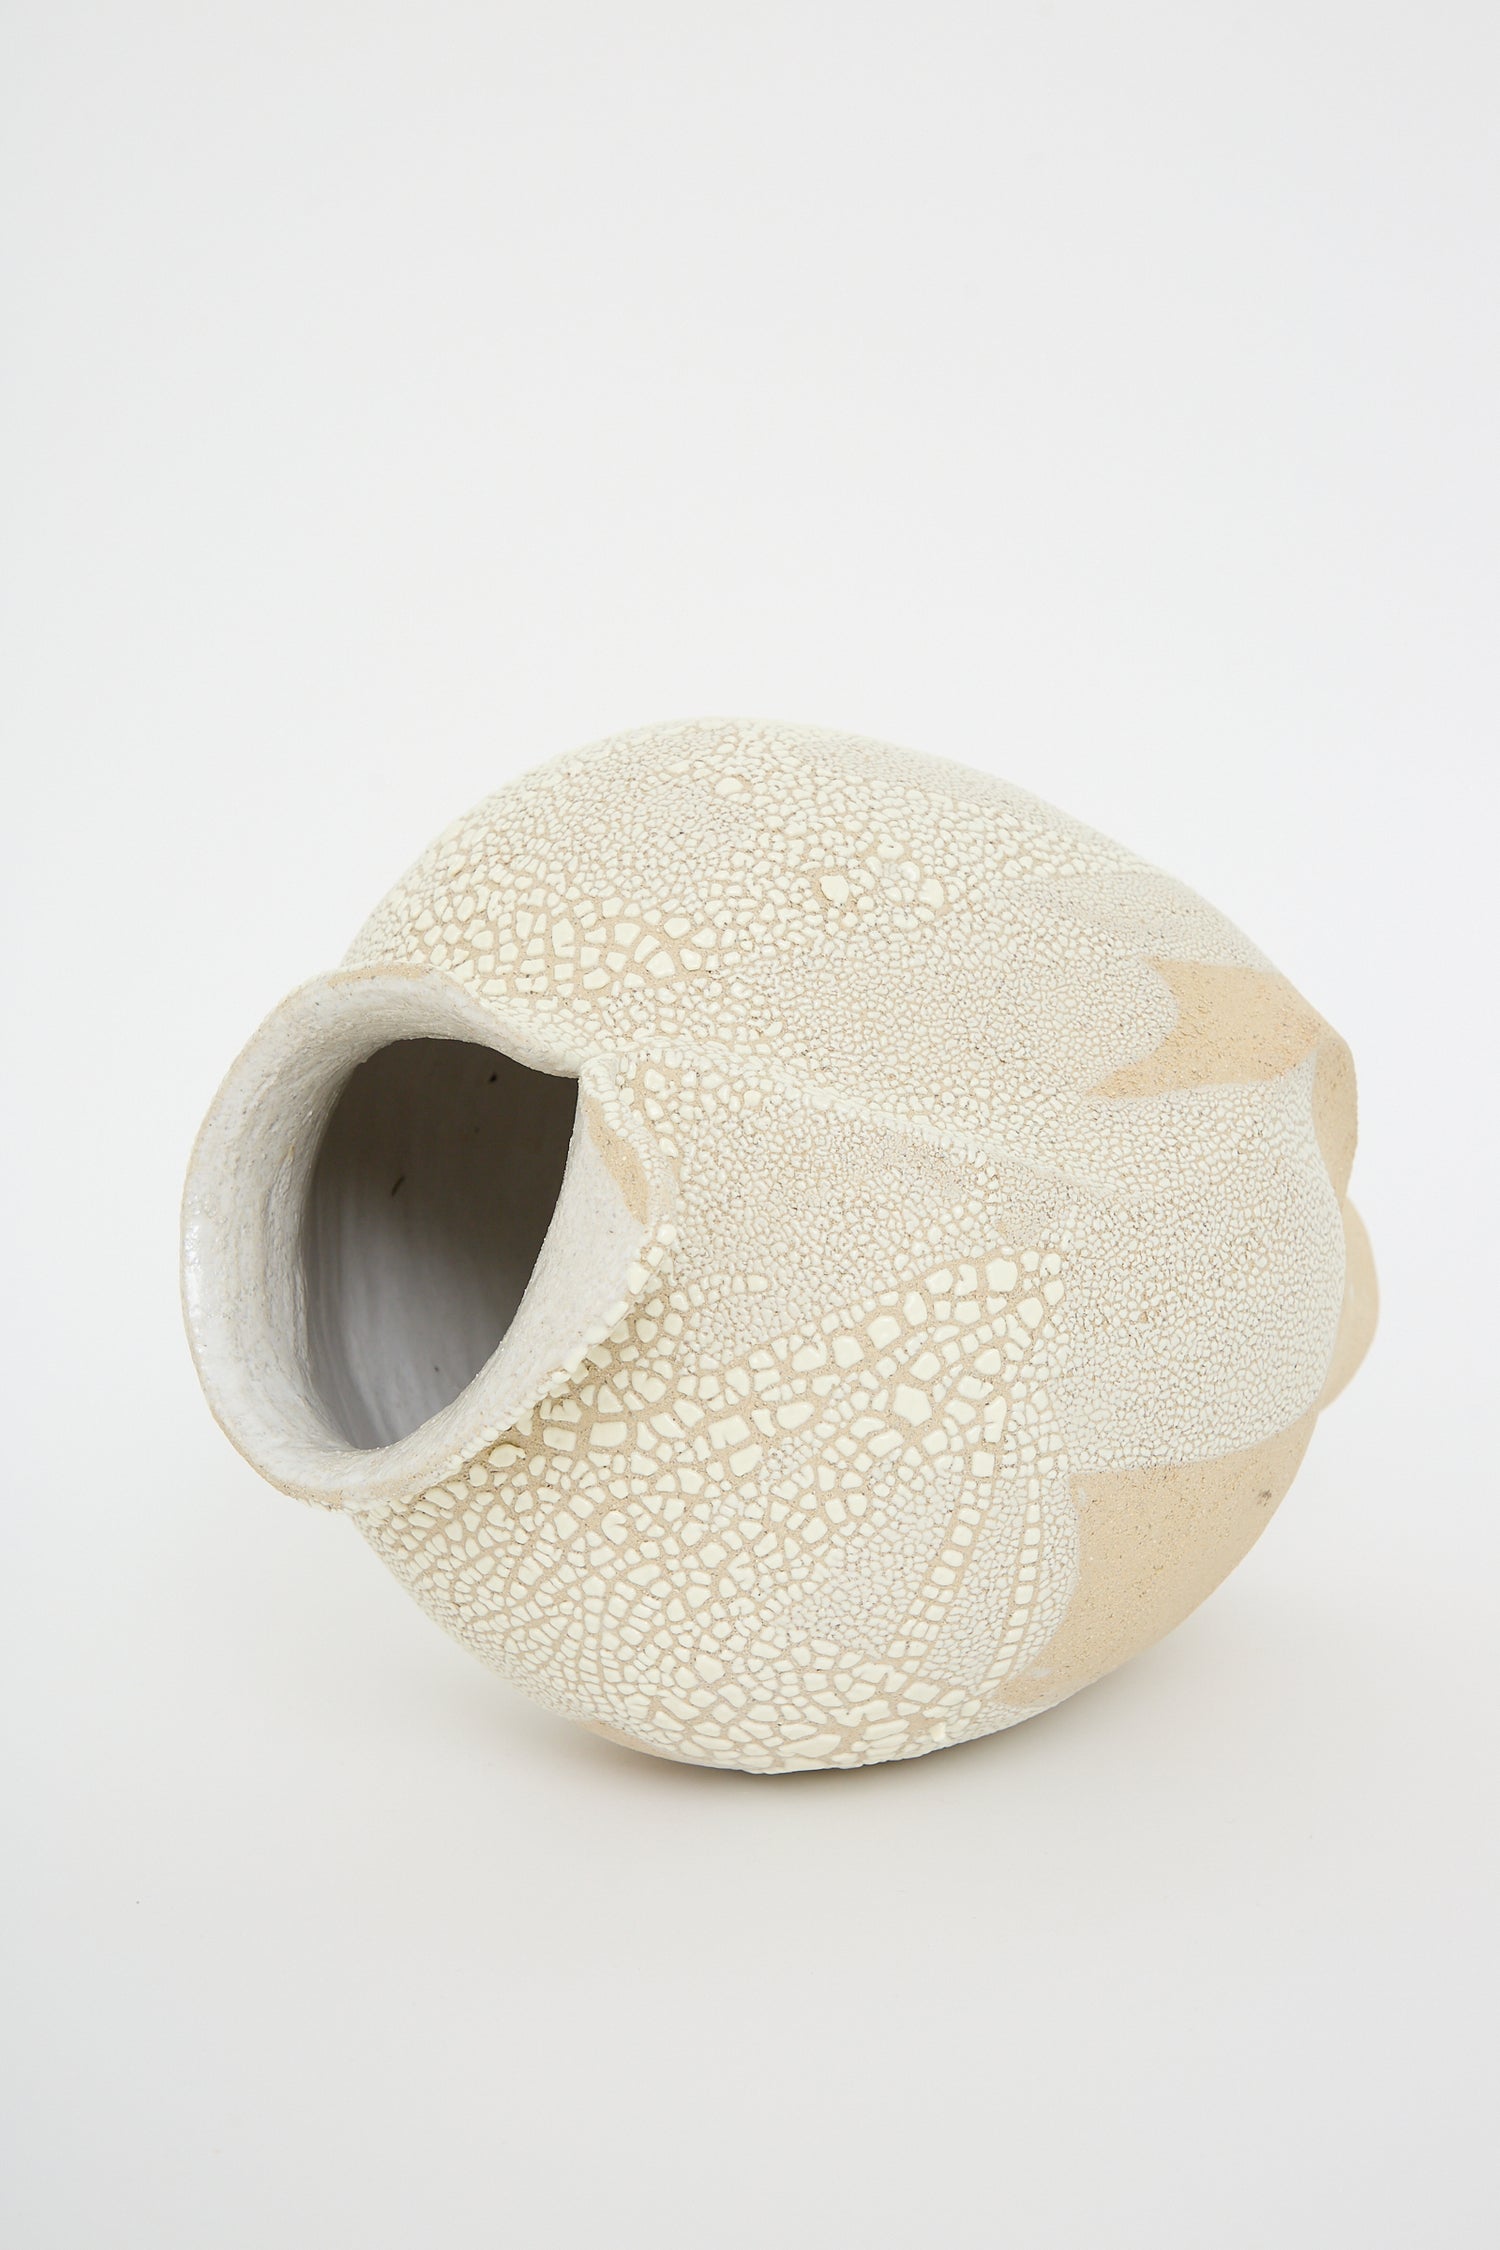 Lost Quarry's Vessel No. 741 in White Sculpture Clay, with a cracked texture and neutral tones, on a white background.